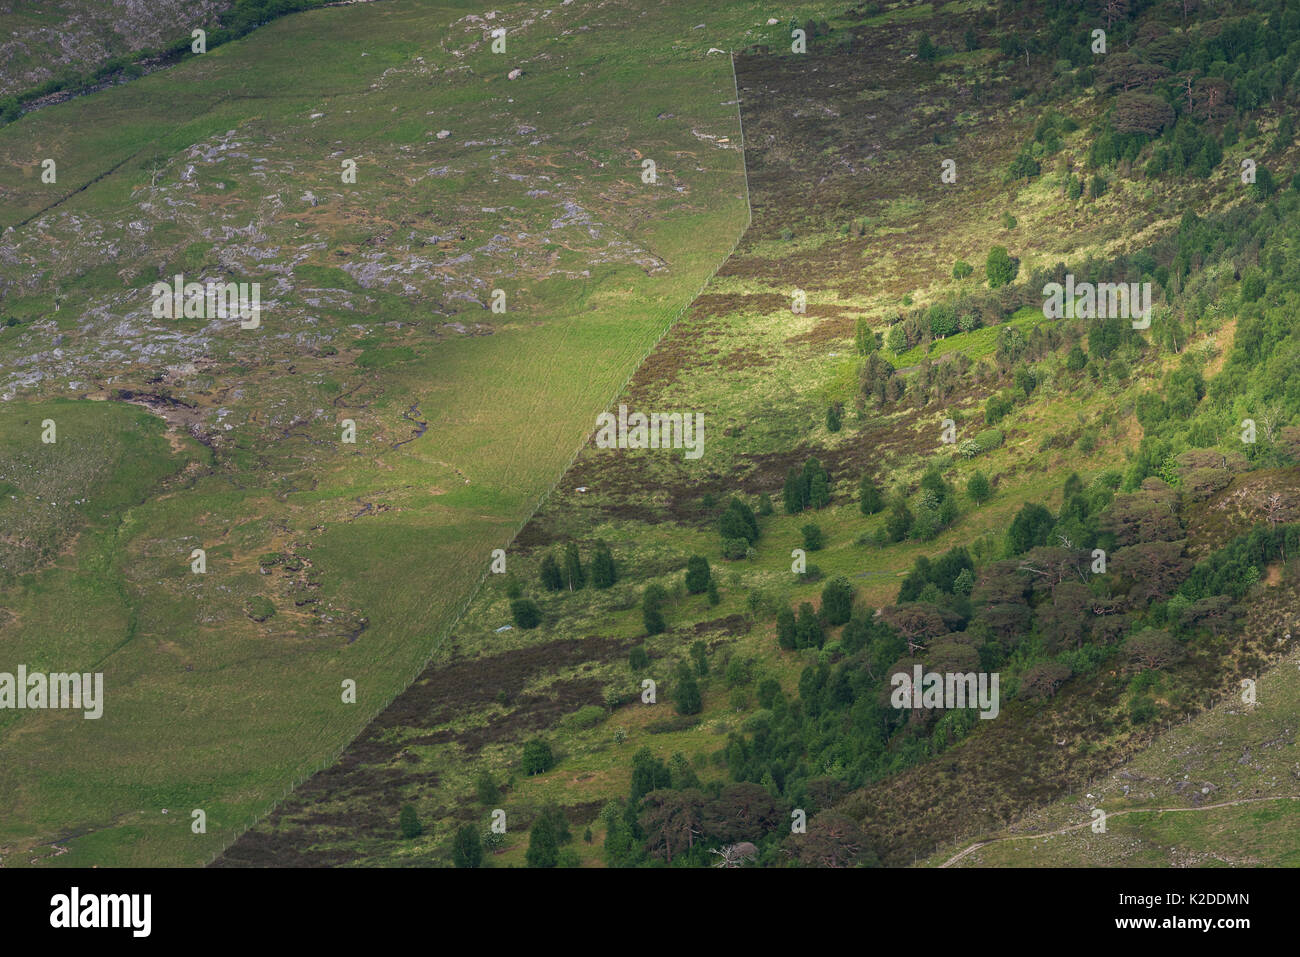 Deer fence showing difference in vegetation within and outside of deer fence,  Scotland, UK, June 2016. Stock Photo